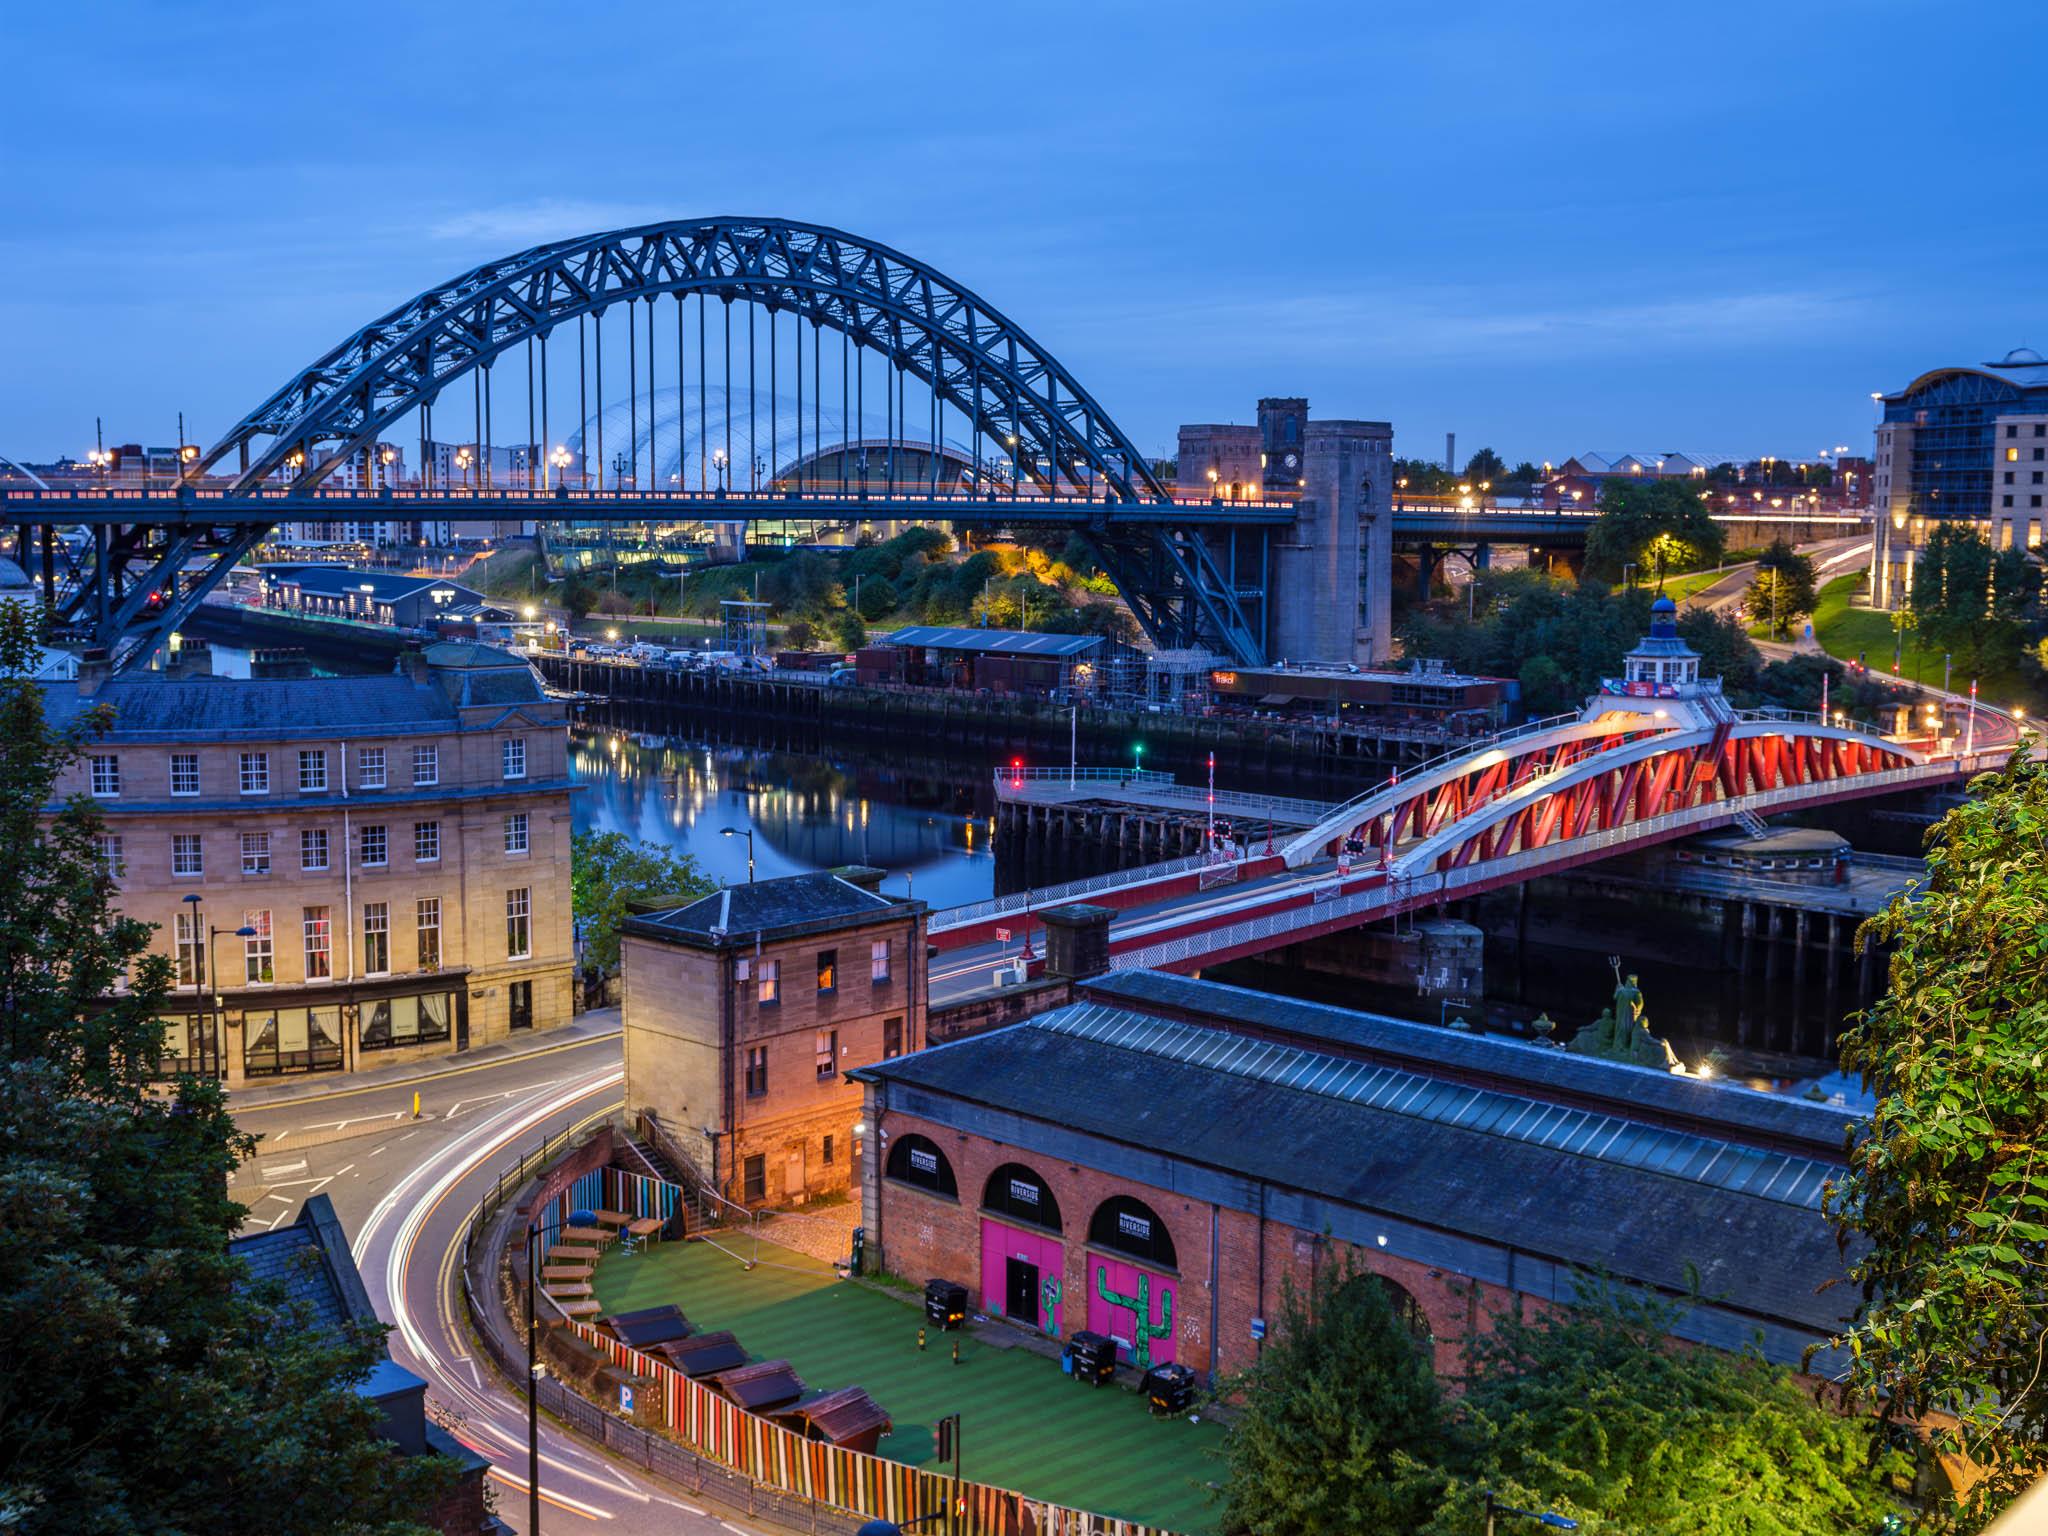 HDR image of blue hour at the Tyne Bridges in Newcastle
